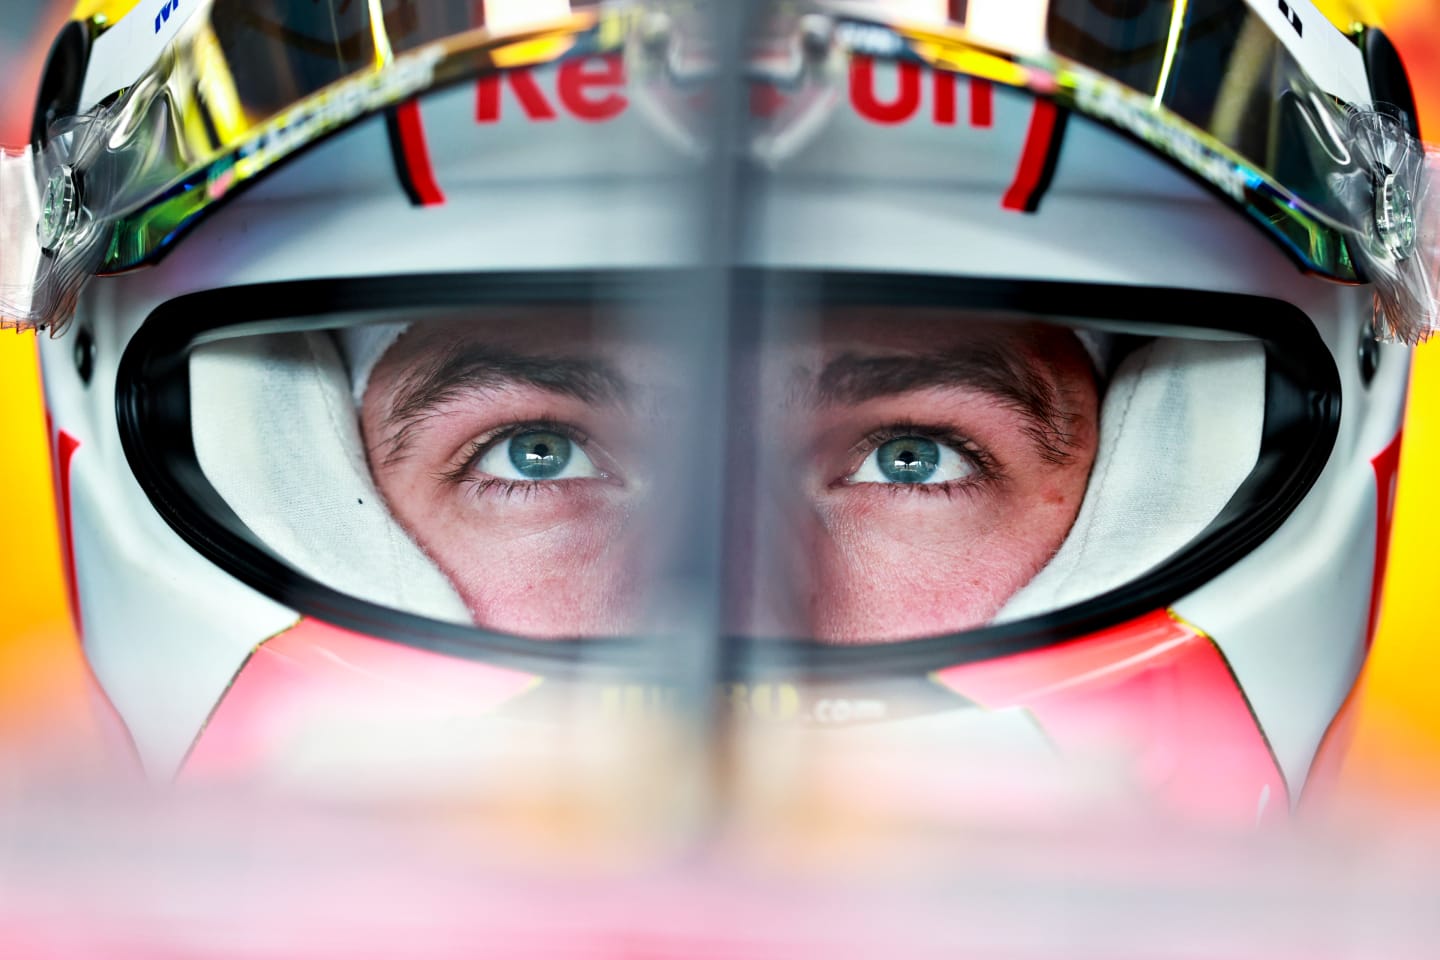 IMOLA, ITALY - APRIL 16: Max Verstappen of Netherlands and Red Bull Racing prepares to drive in the garage during practice ahead of the F1 Grand Prix of Emilia Romagna at Autodromo Enzo e Dino Ferrari on April 16, 2021 in Imola, Italy. (Photo by Mark Thompson/Getty Images)